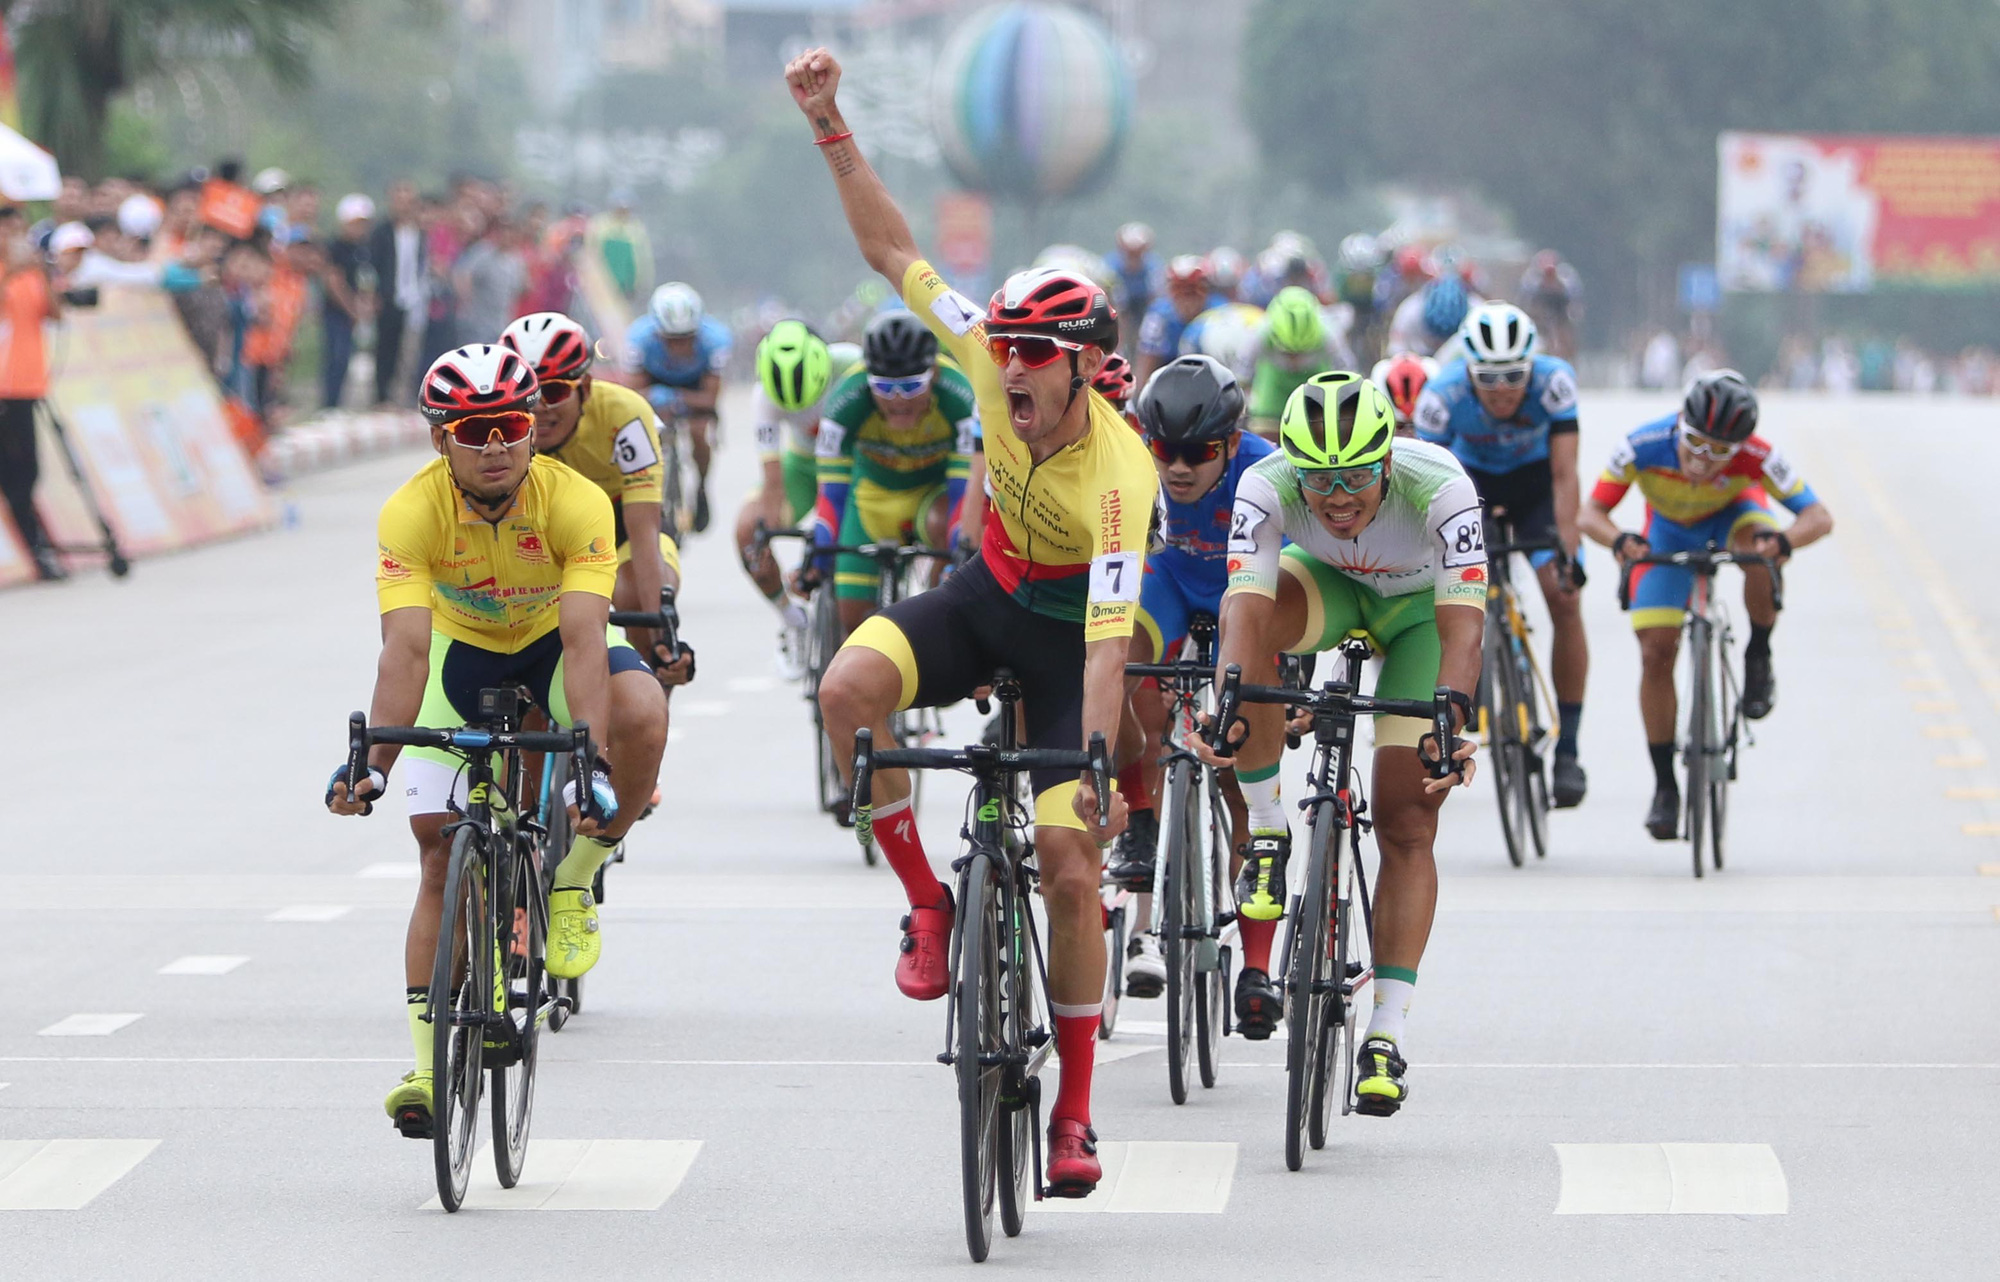 Spaniard wins 3rd stage of national cycling race in Vietnam